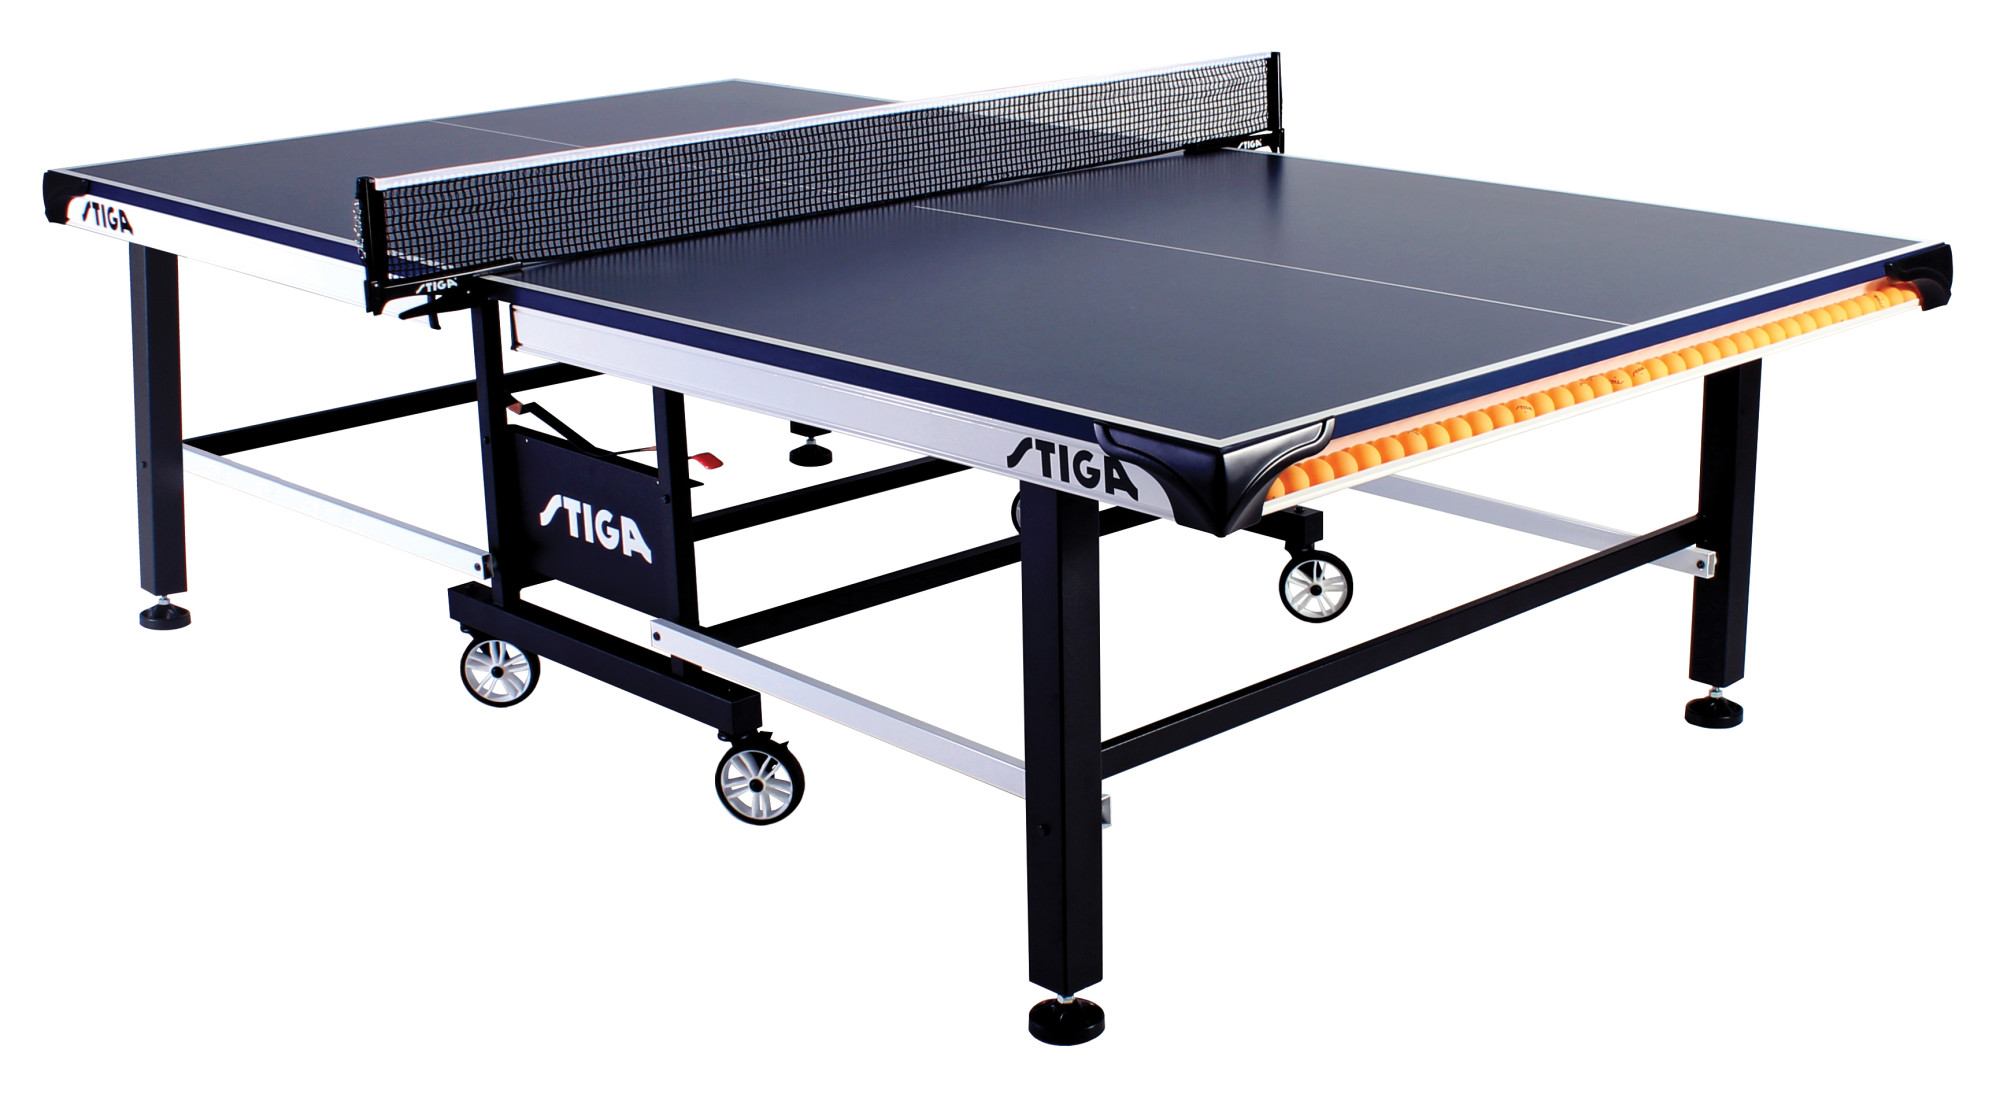 STIGA Tournament Series 520 Tournament-Grade Indoor Table Tennis Table with Premium Clipper Net and Post Included - image 1 of 19